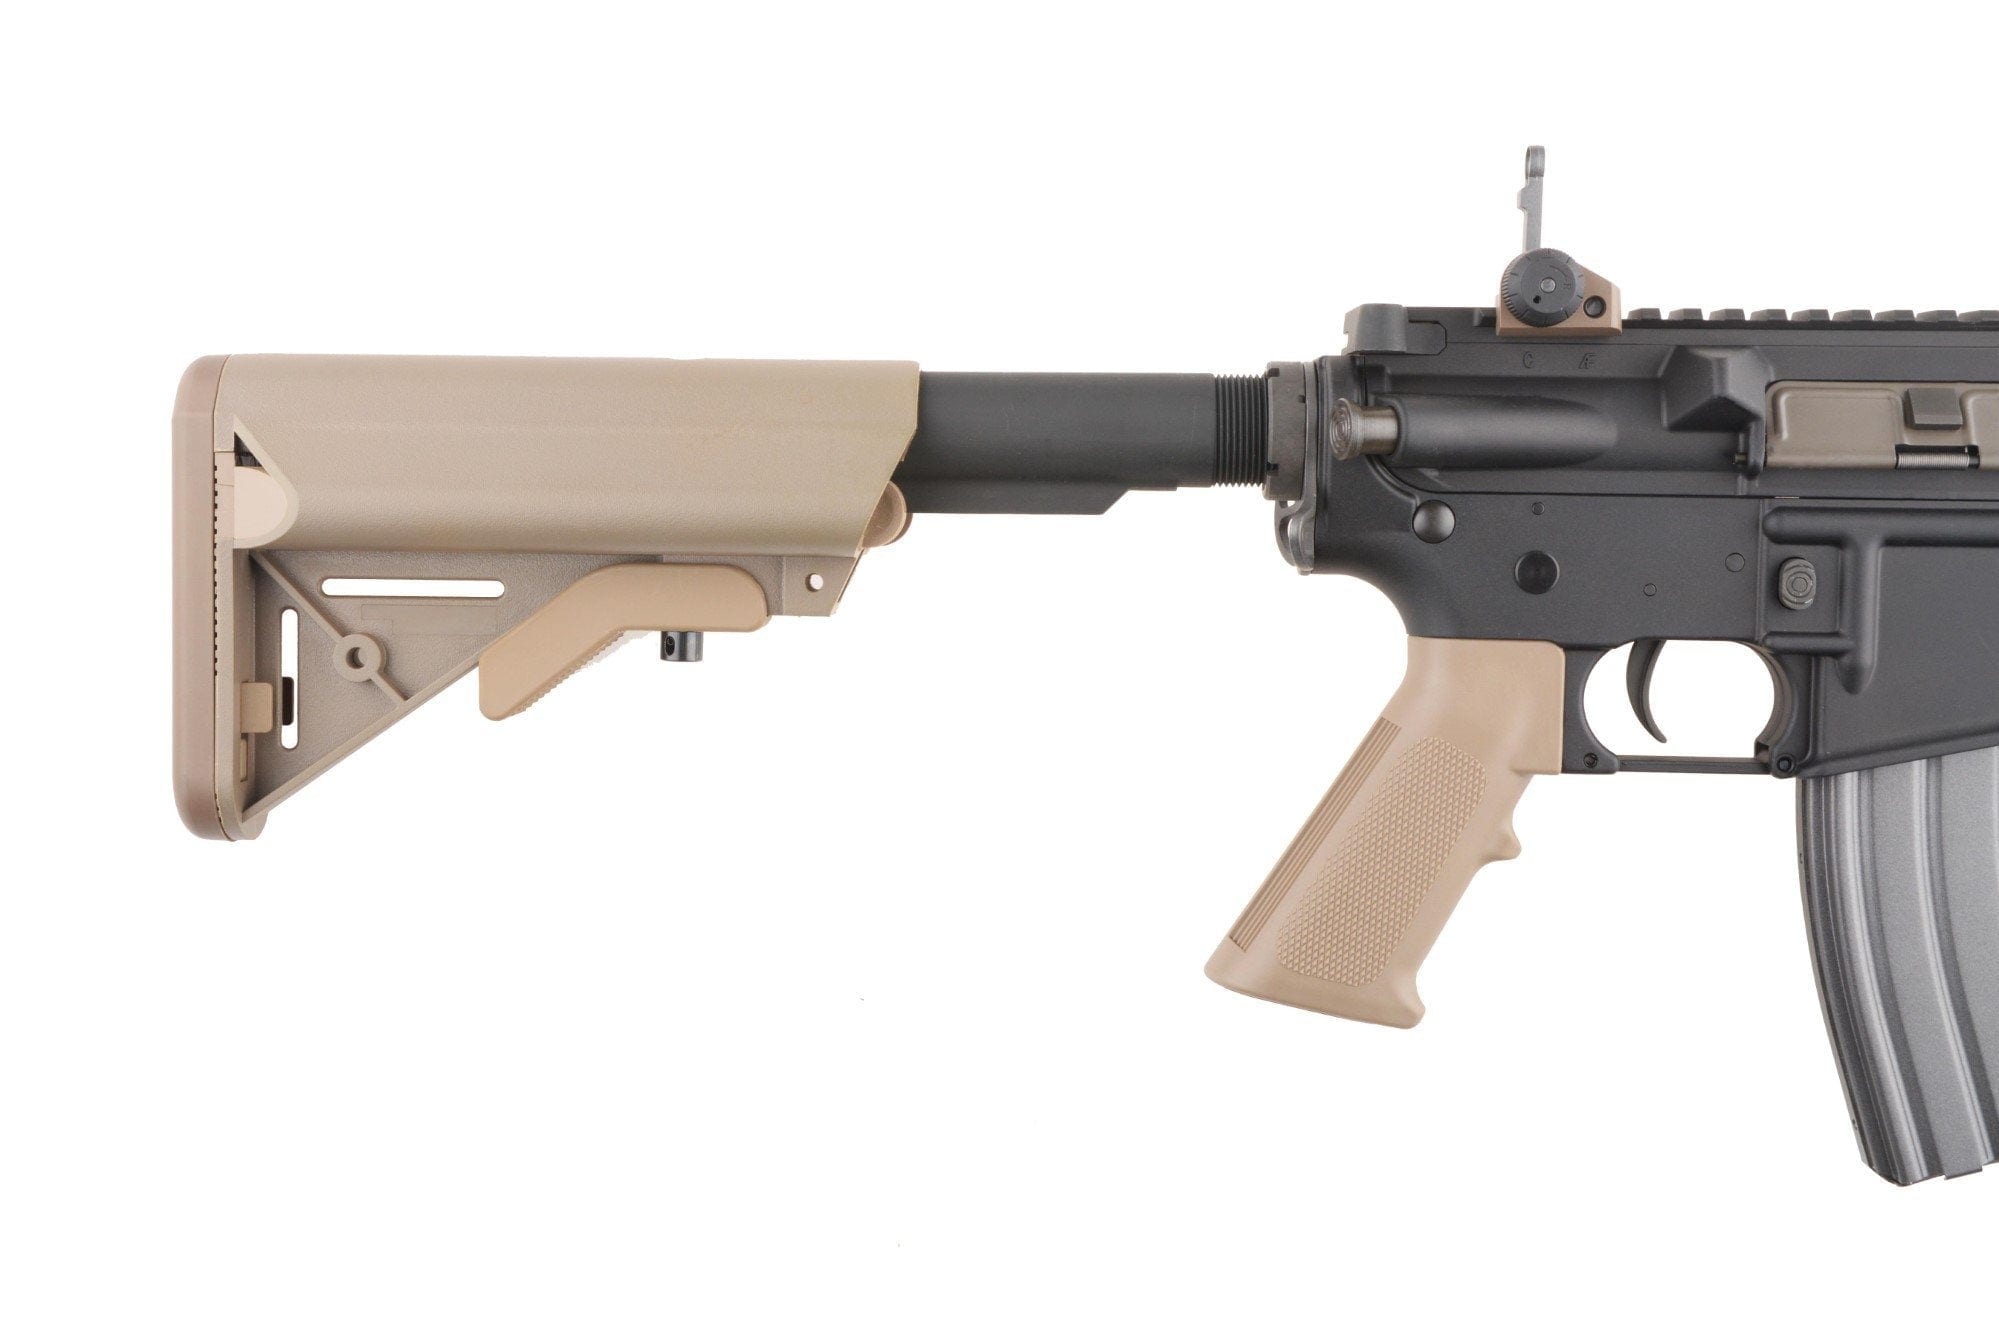 VR16 MK18 Mod1 Airsoft rifle - Tan by VFC on Airsoft Mania Europe